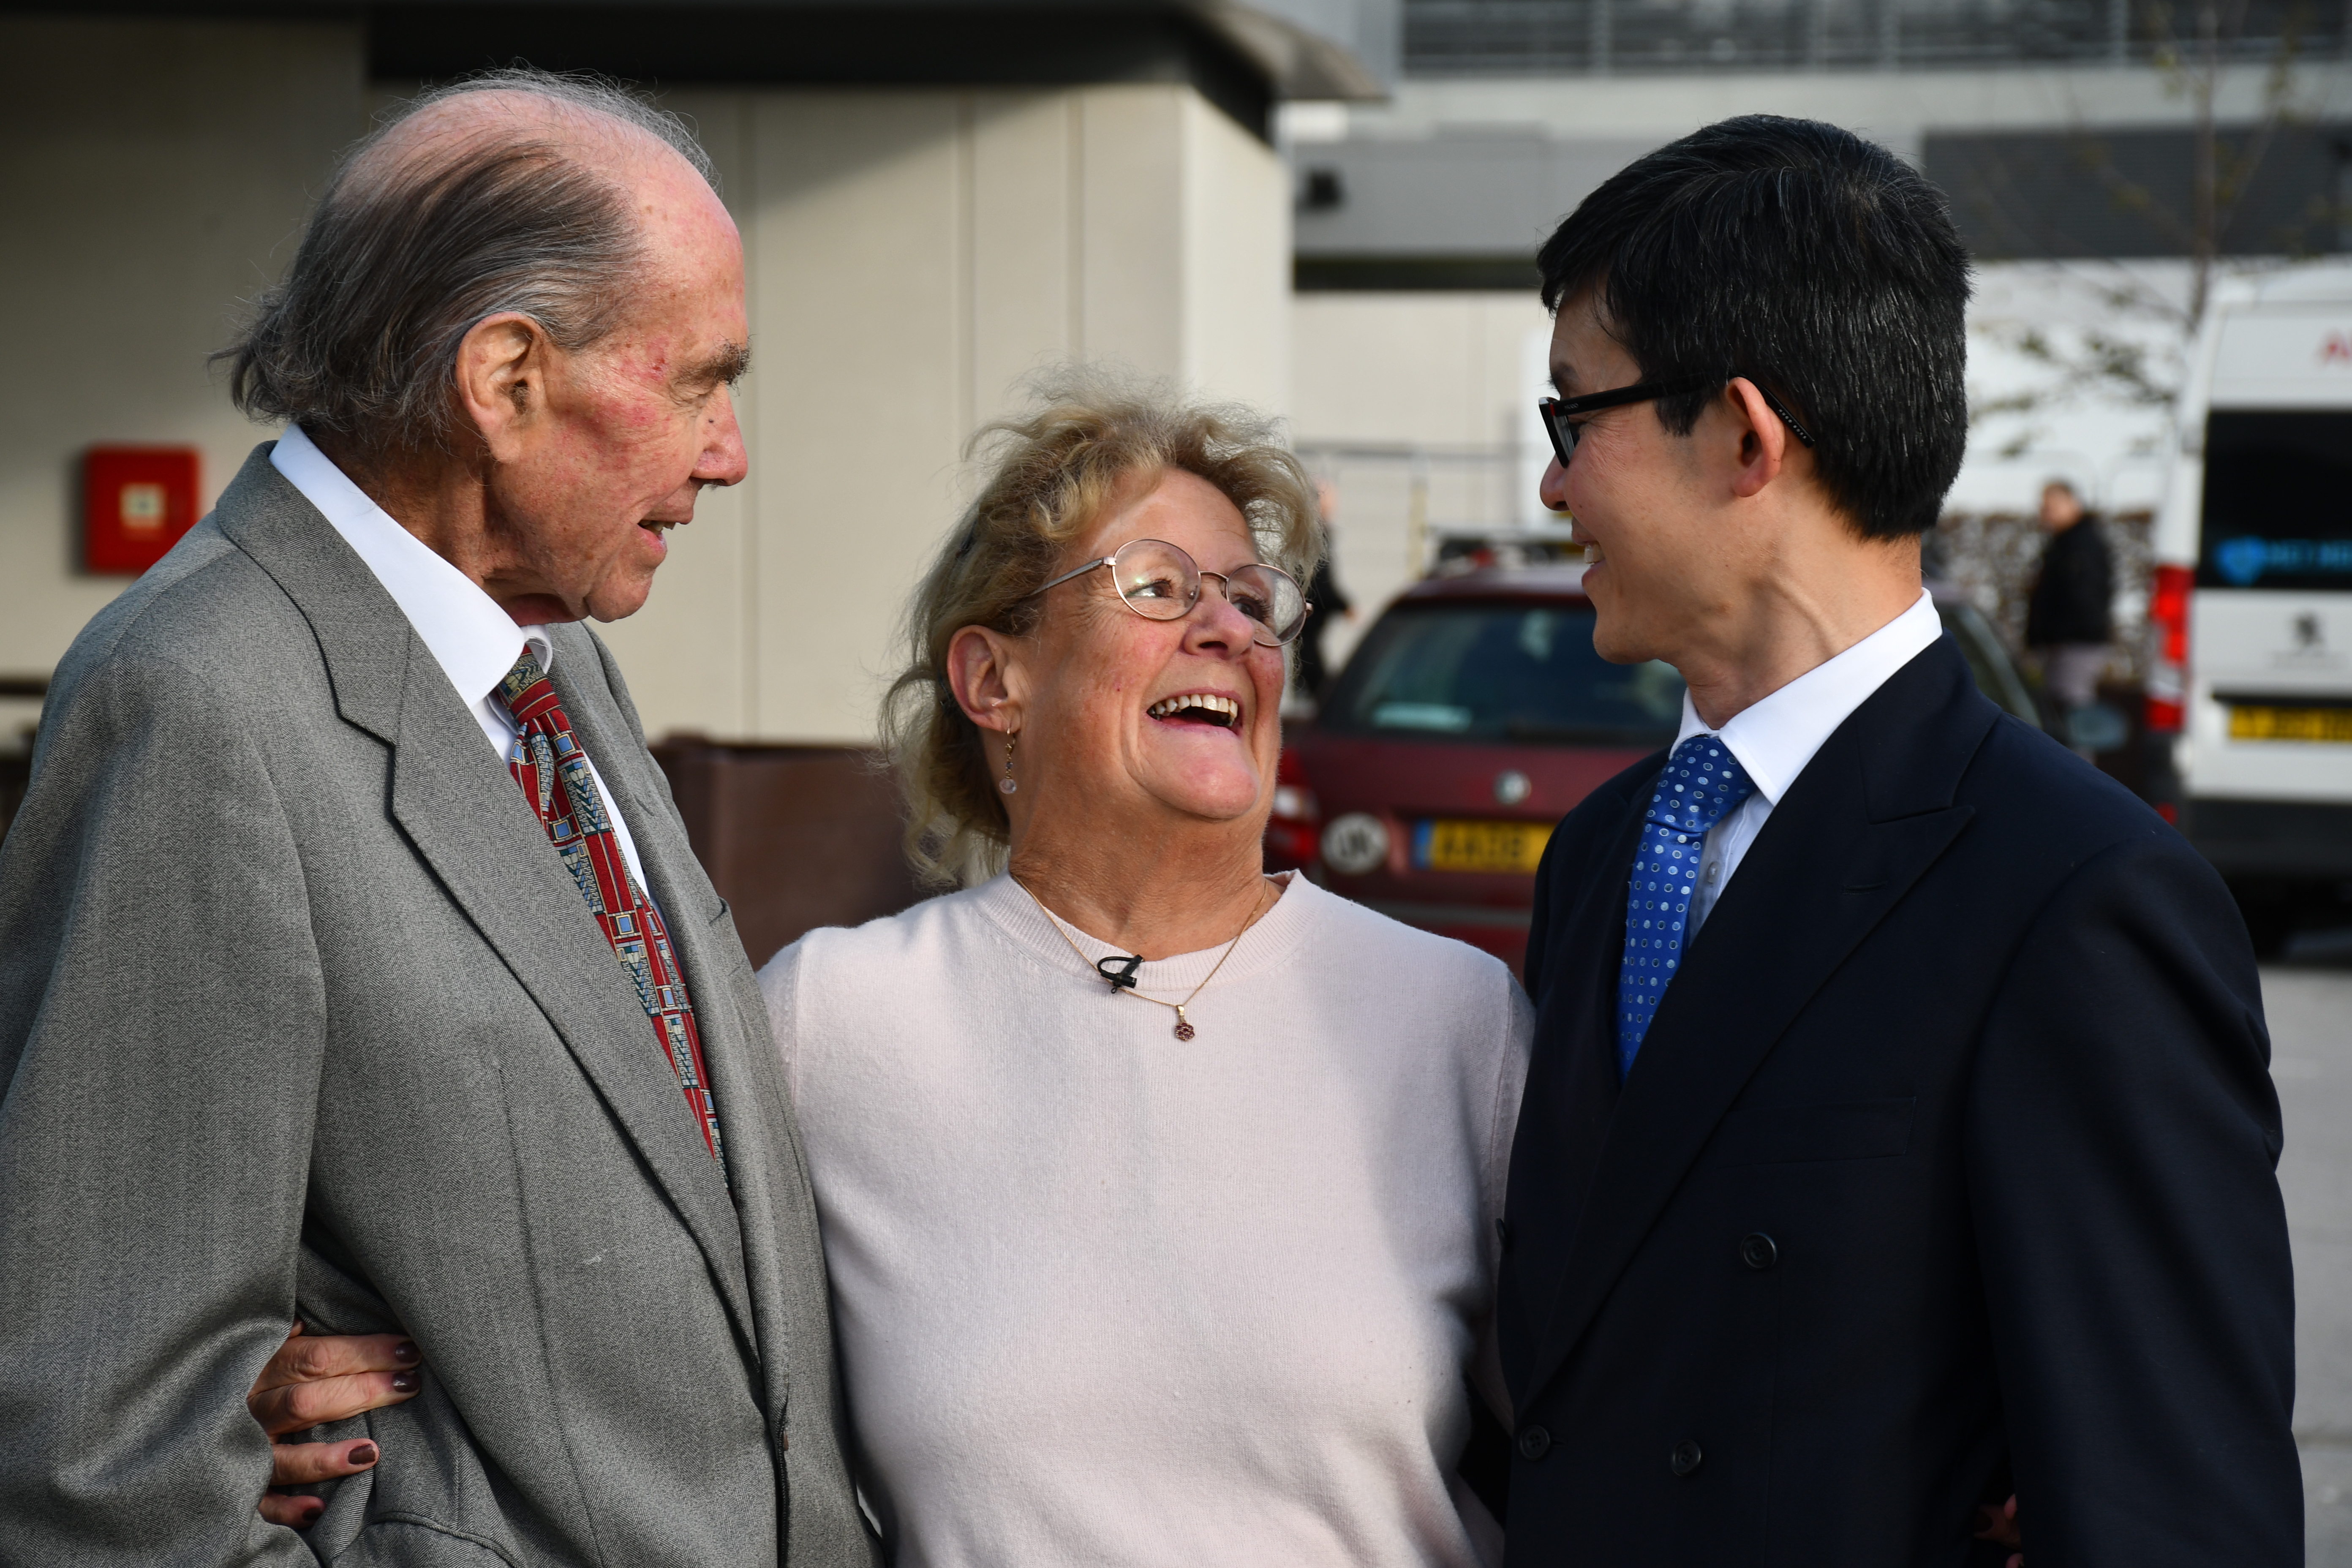 Sandy Law with Sir Terence English (left), who led the team for her first surgery, and Mr Steven Tsui (right) who led the team for her second surgery. (Royal Papworth Hospital/ PA)